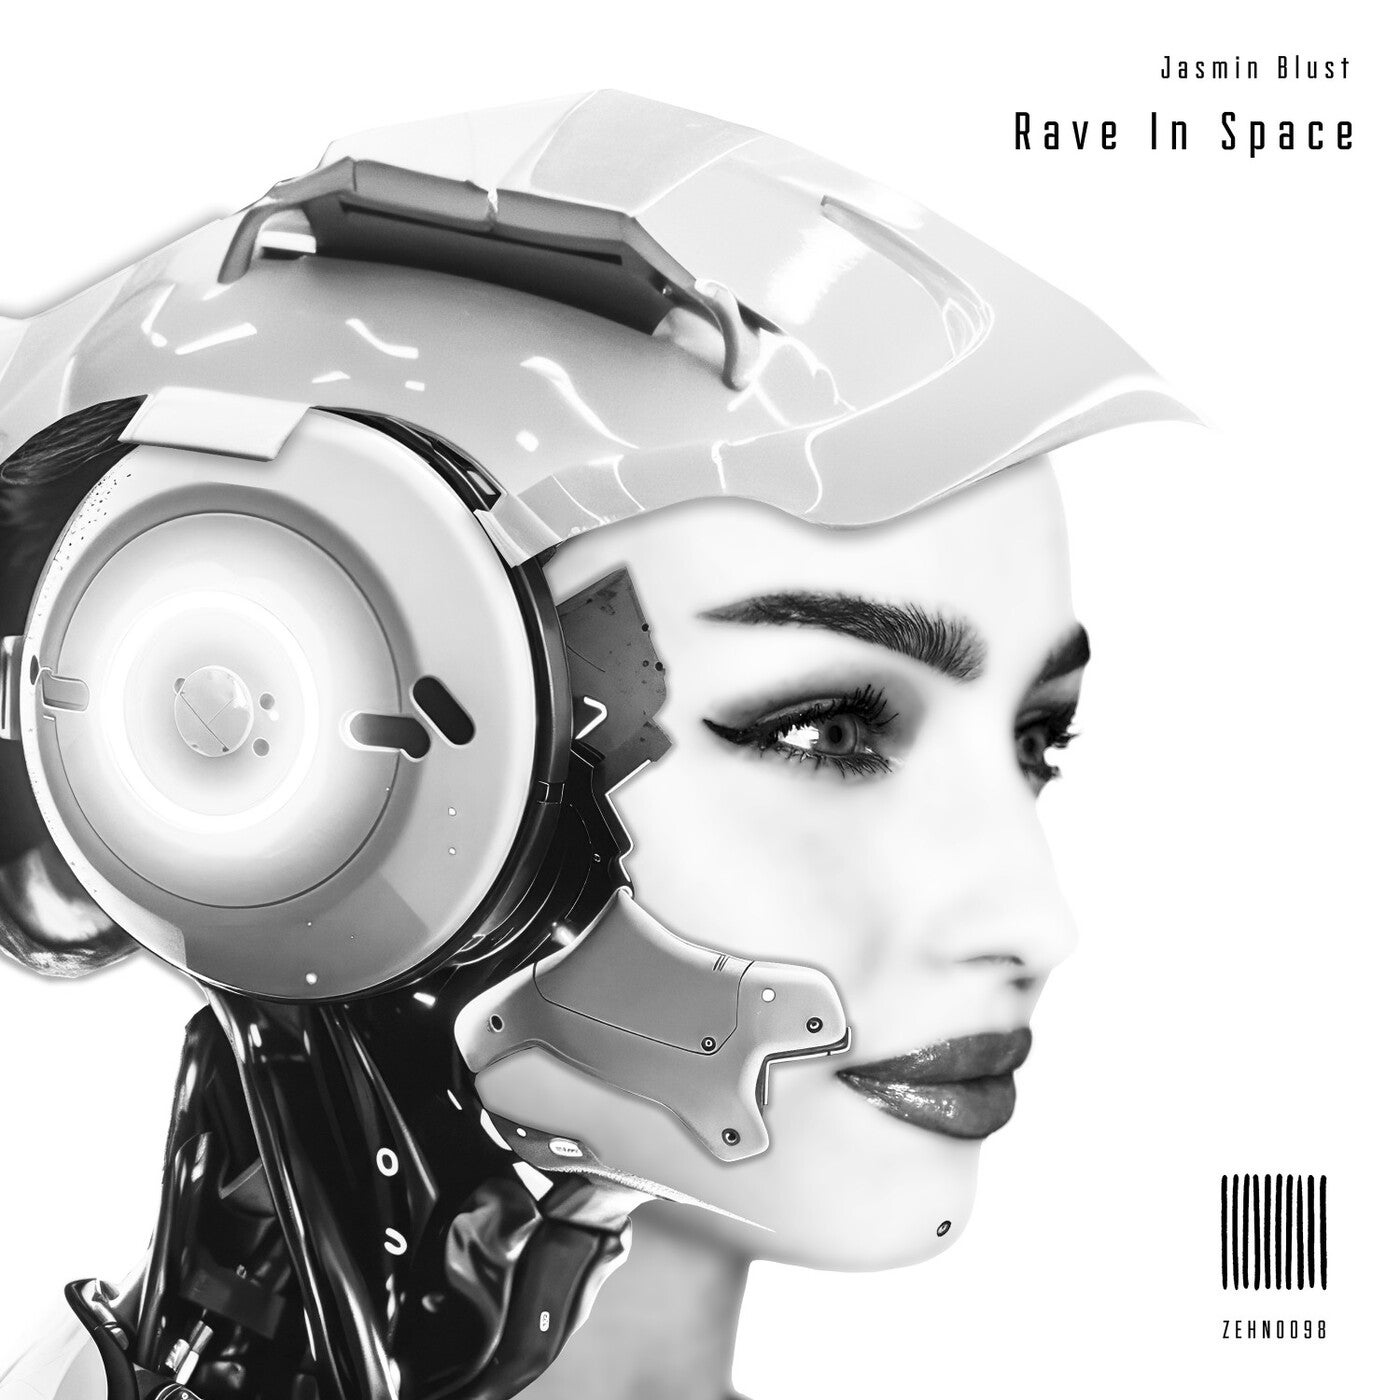 Rave in Space